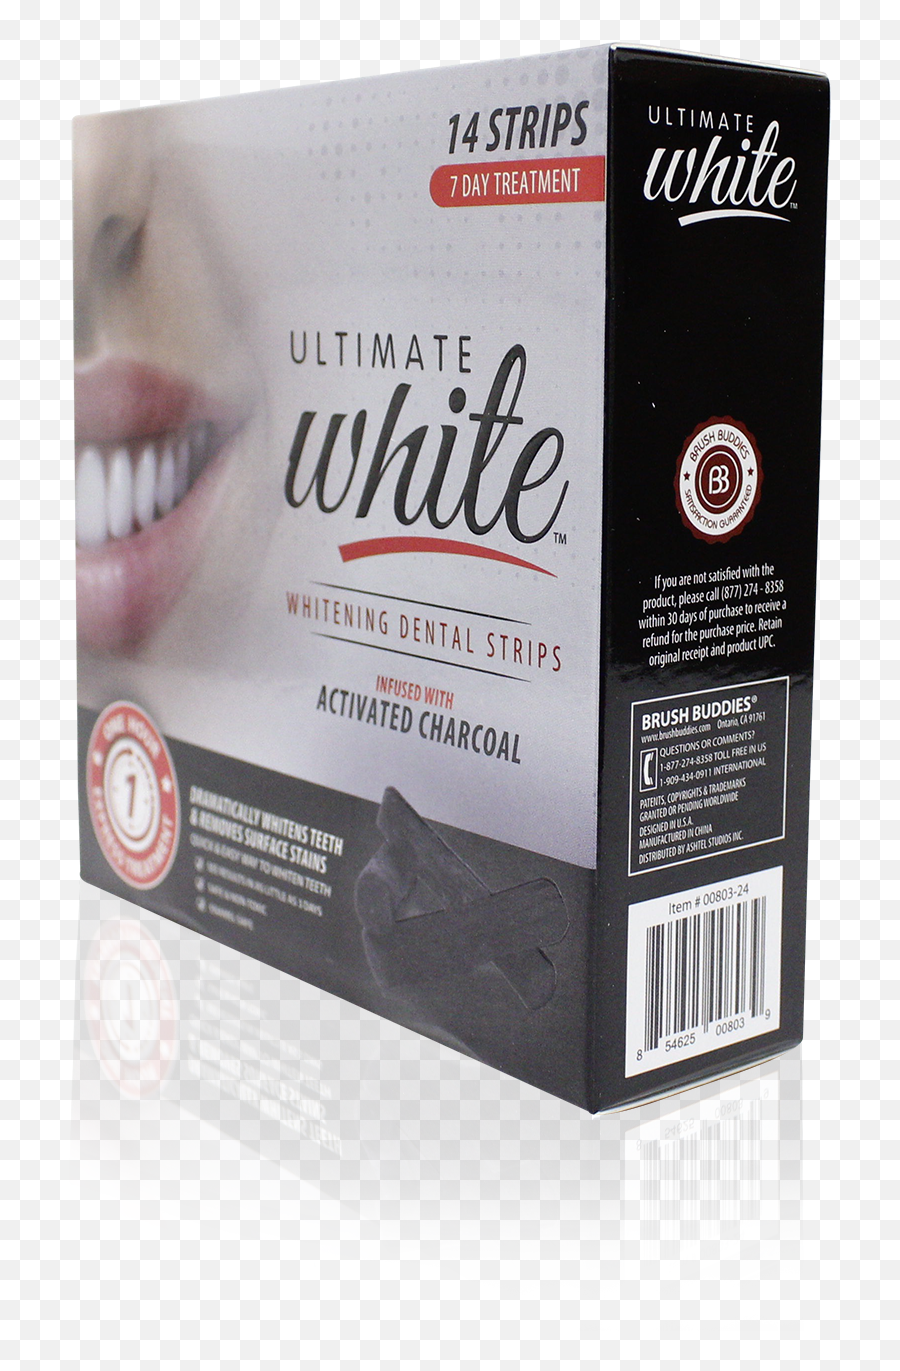 Ultimate White Whitening Dental Strips Infused With Emoji,Tooth Emoji Copy